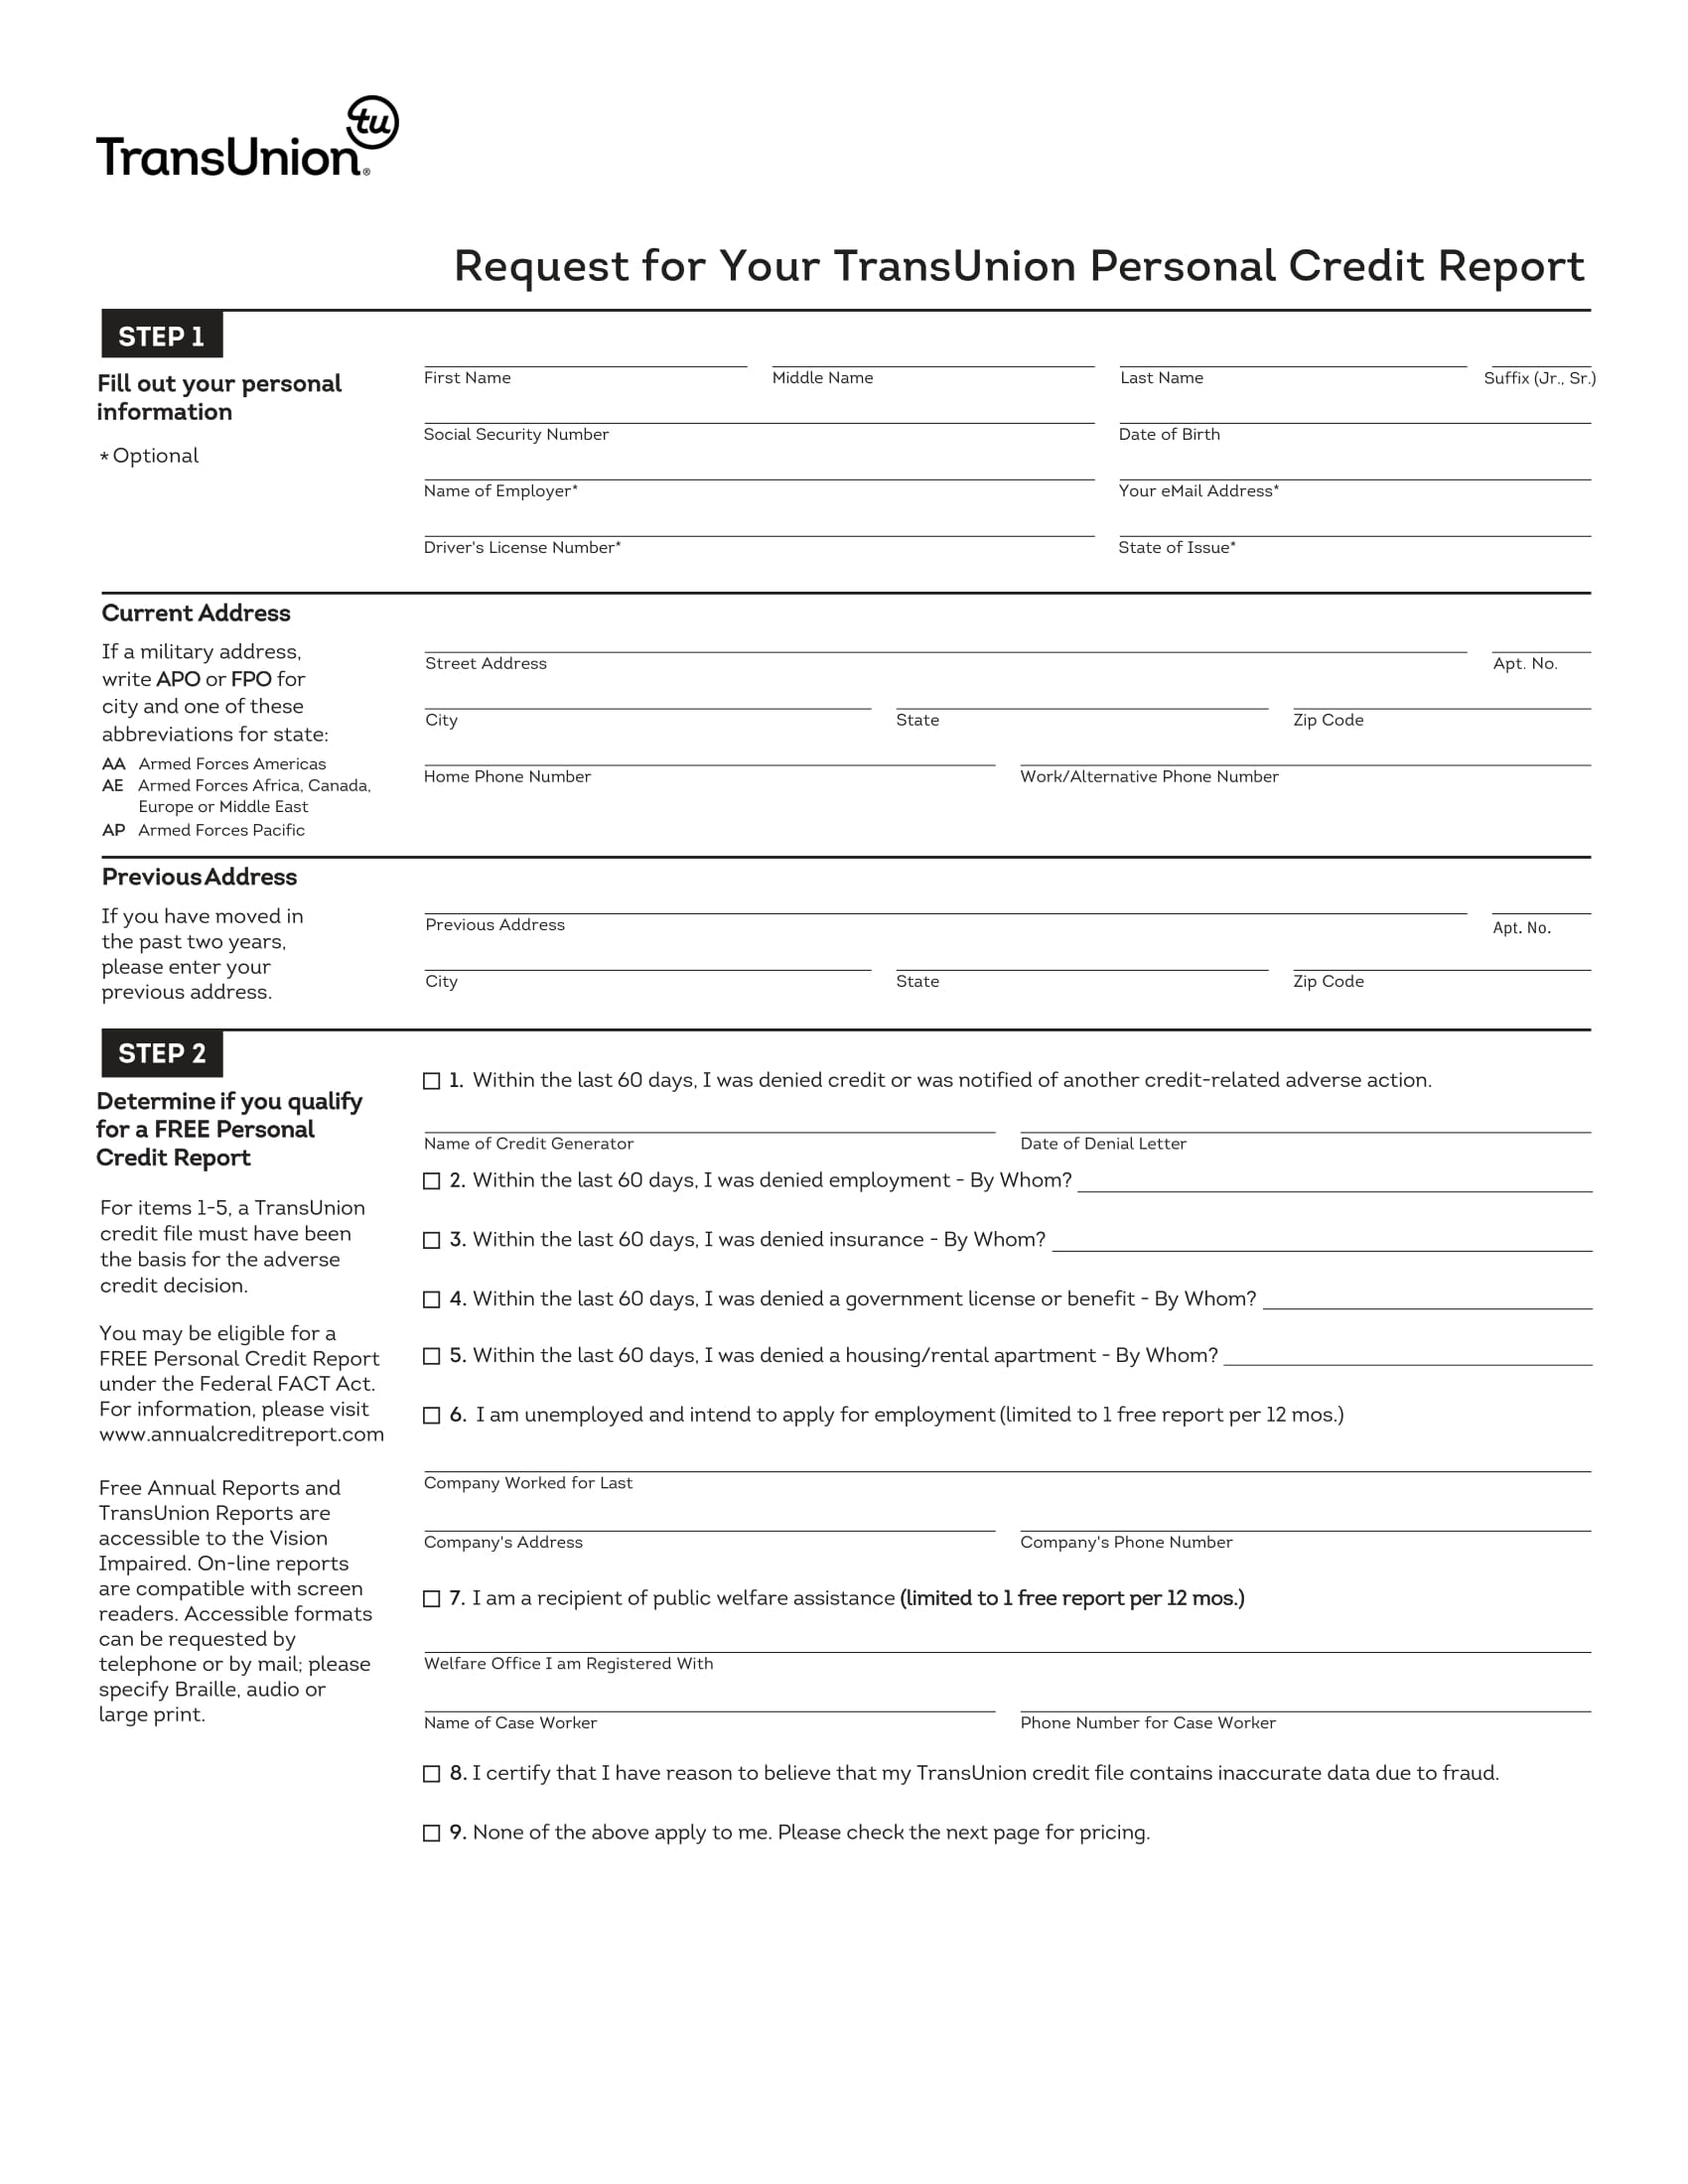 FREE 13 Credit Report Forms In PDF MS Word